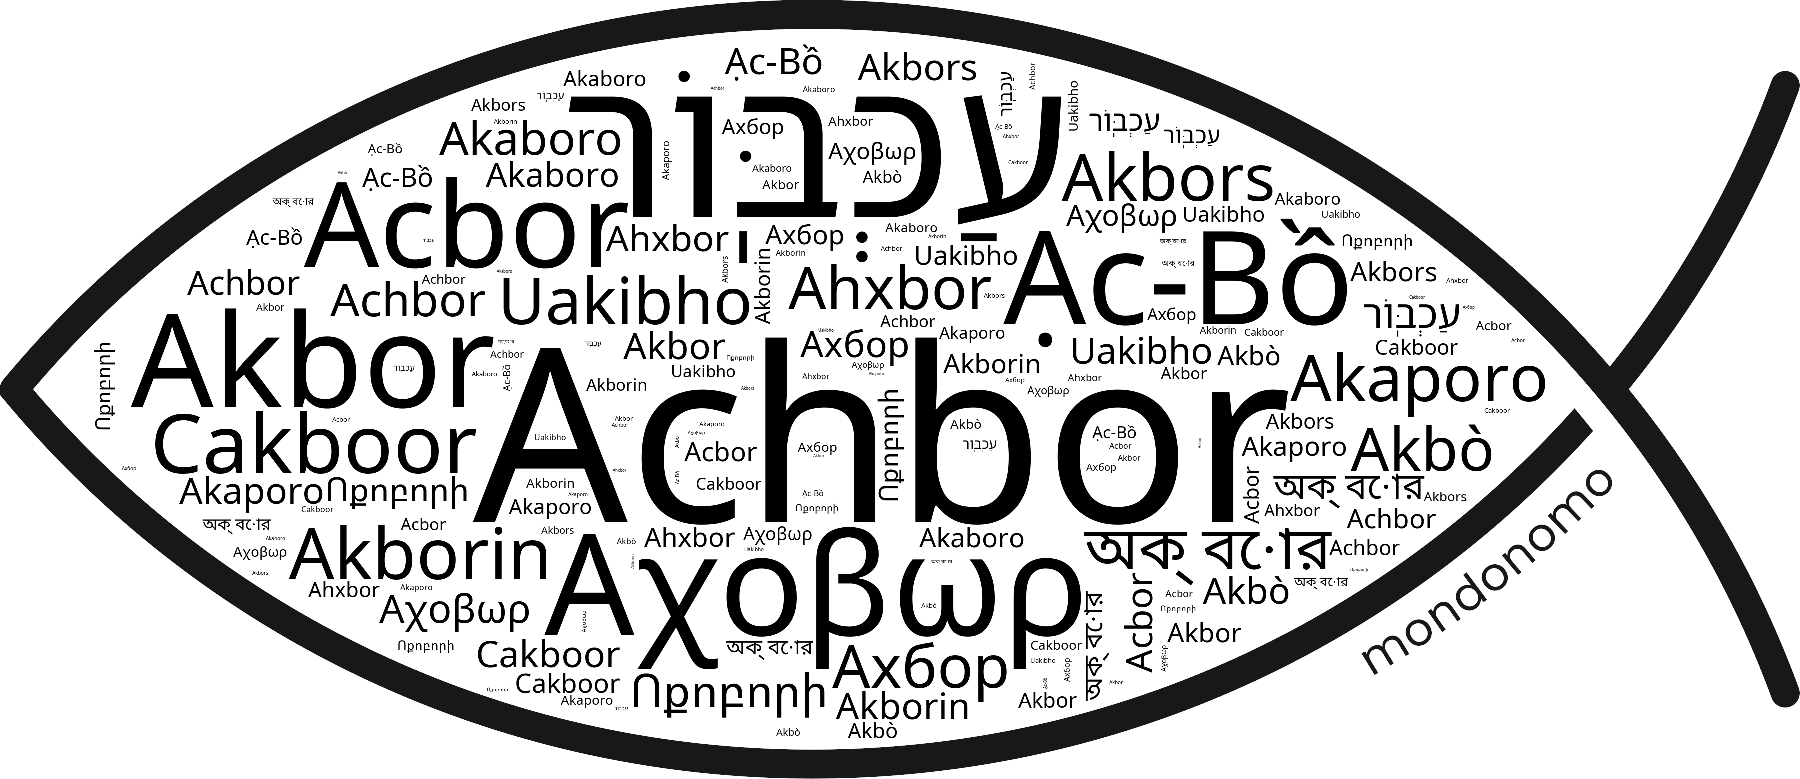 Name Achbor in the world's Bibles